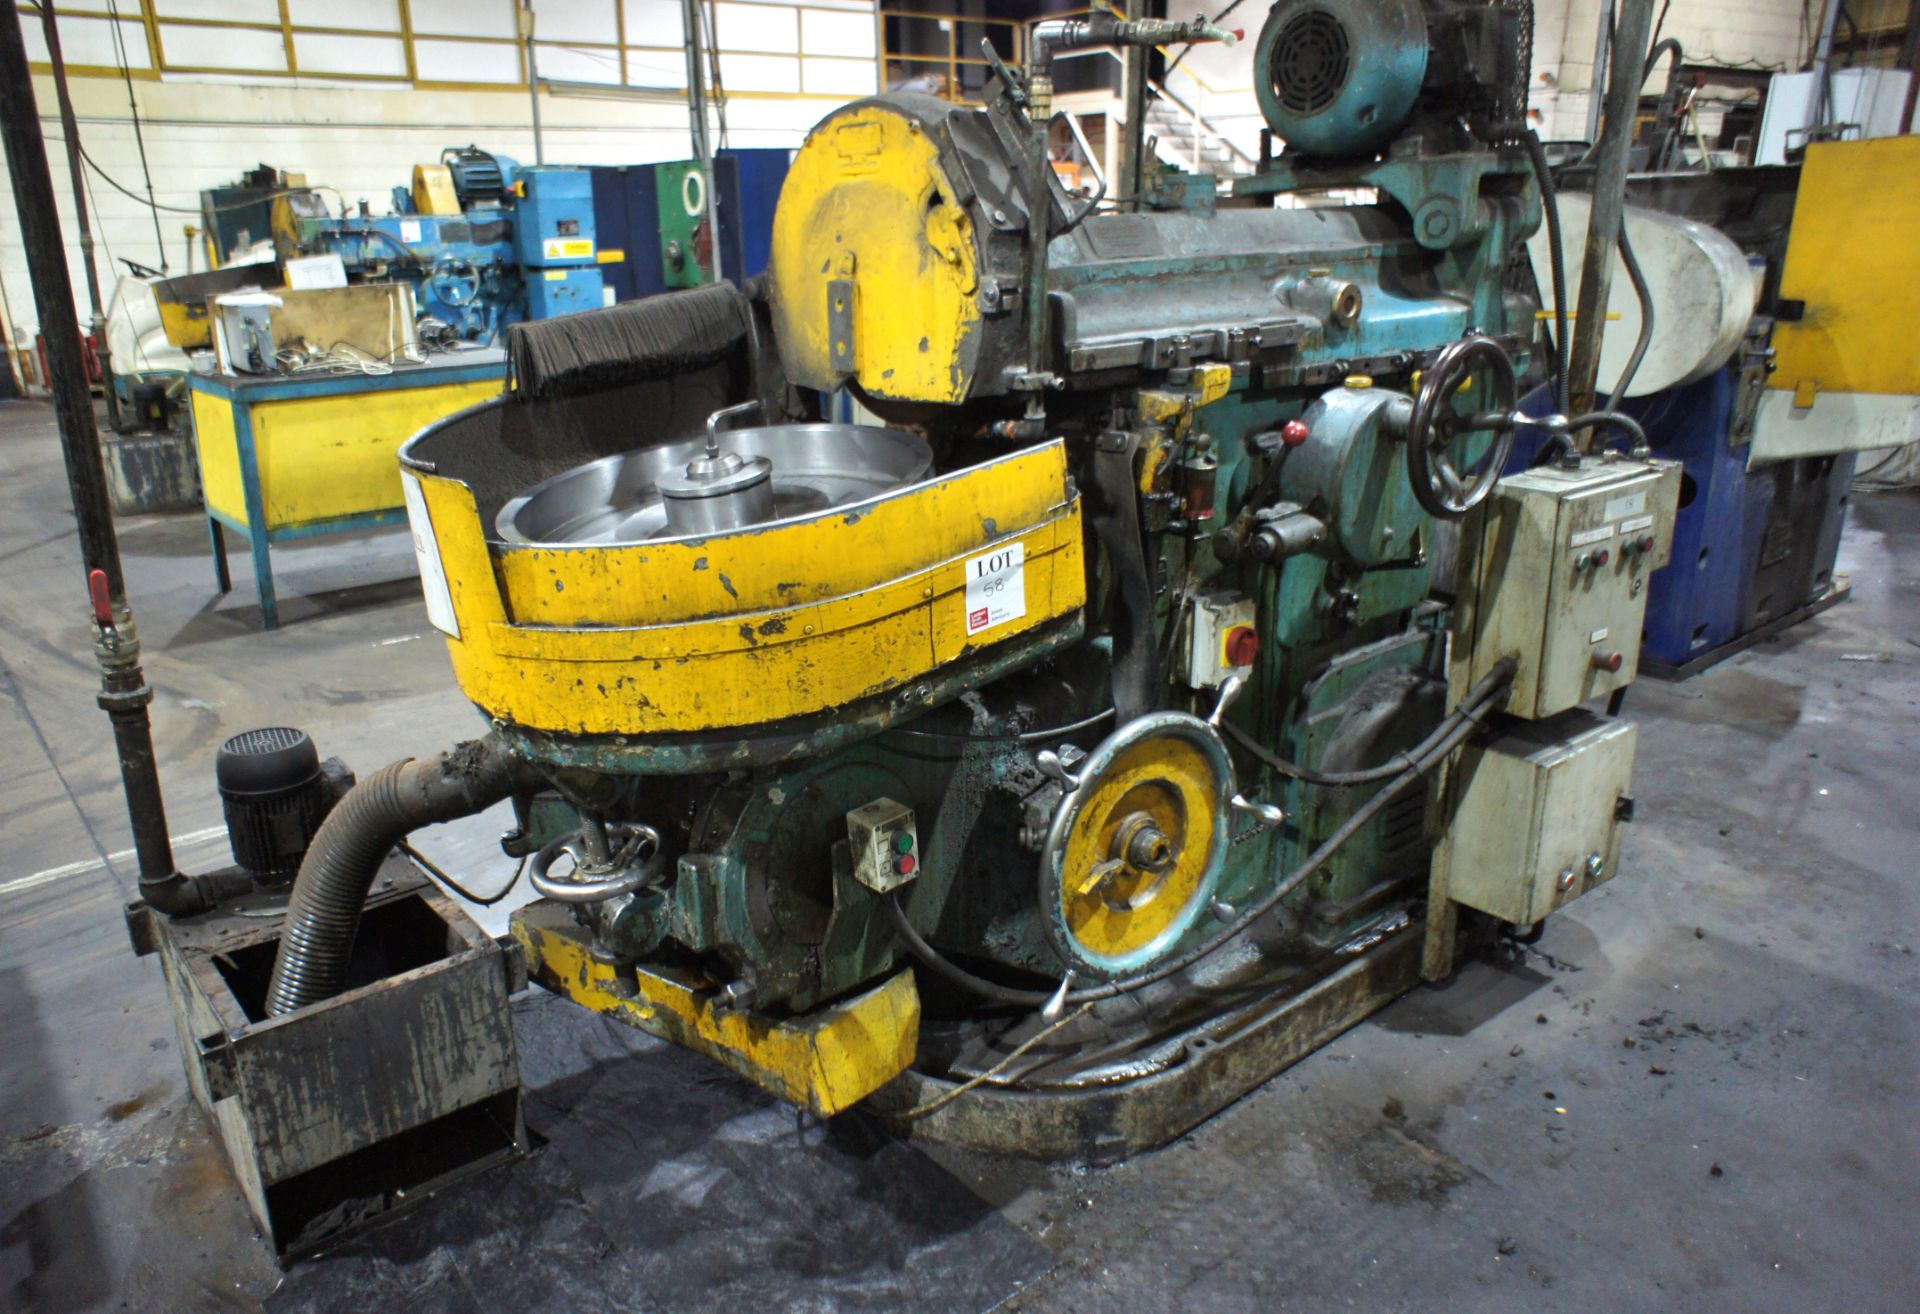 Churchill RBY 25 rotary surface grinder